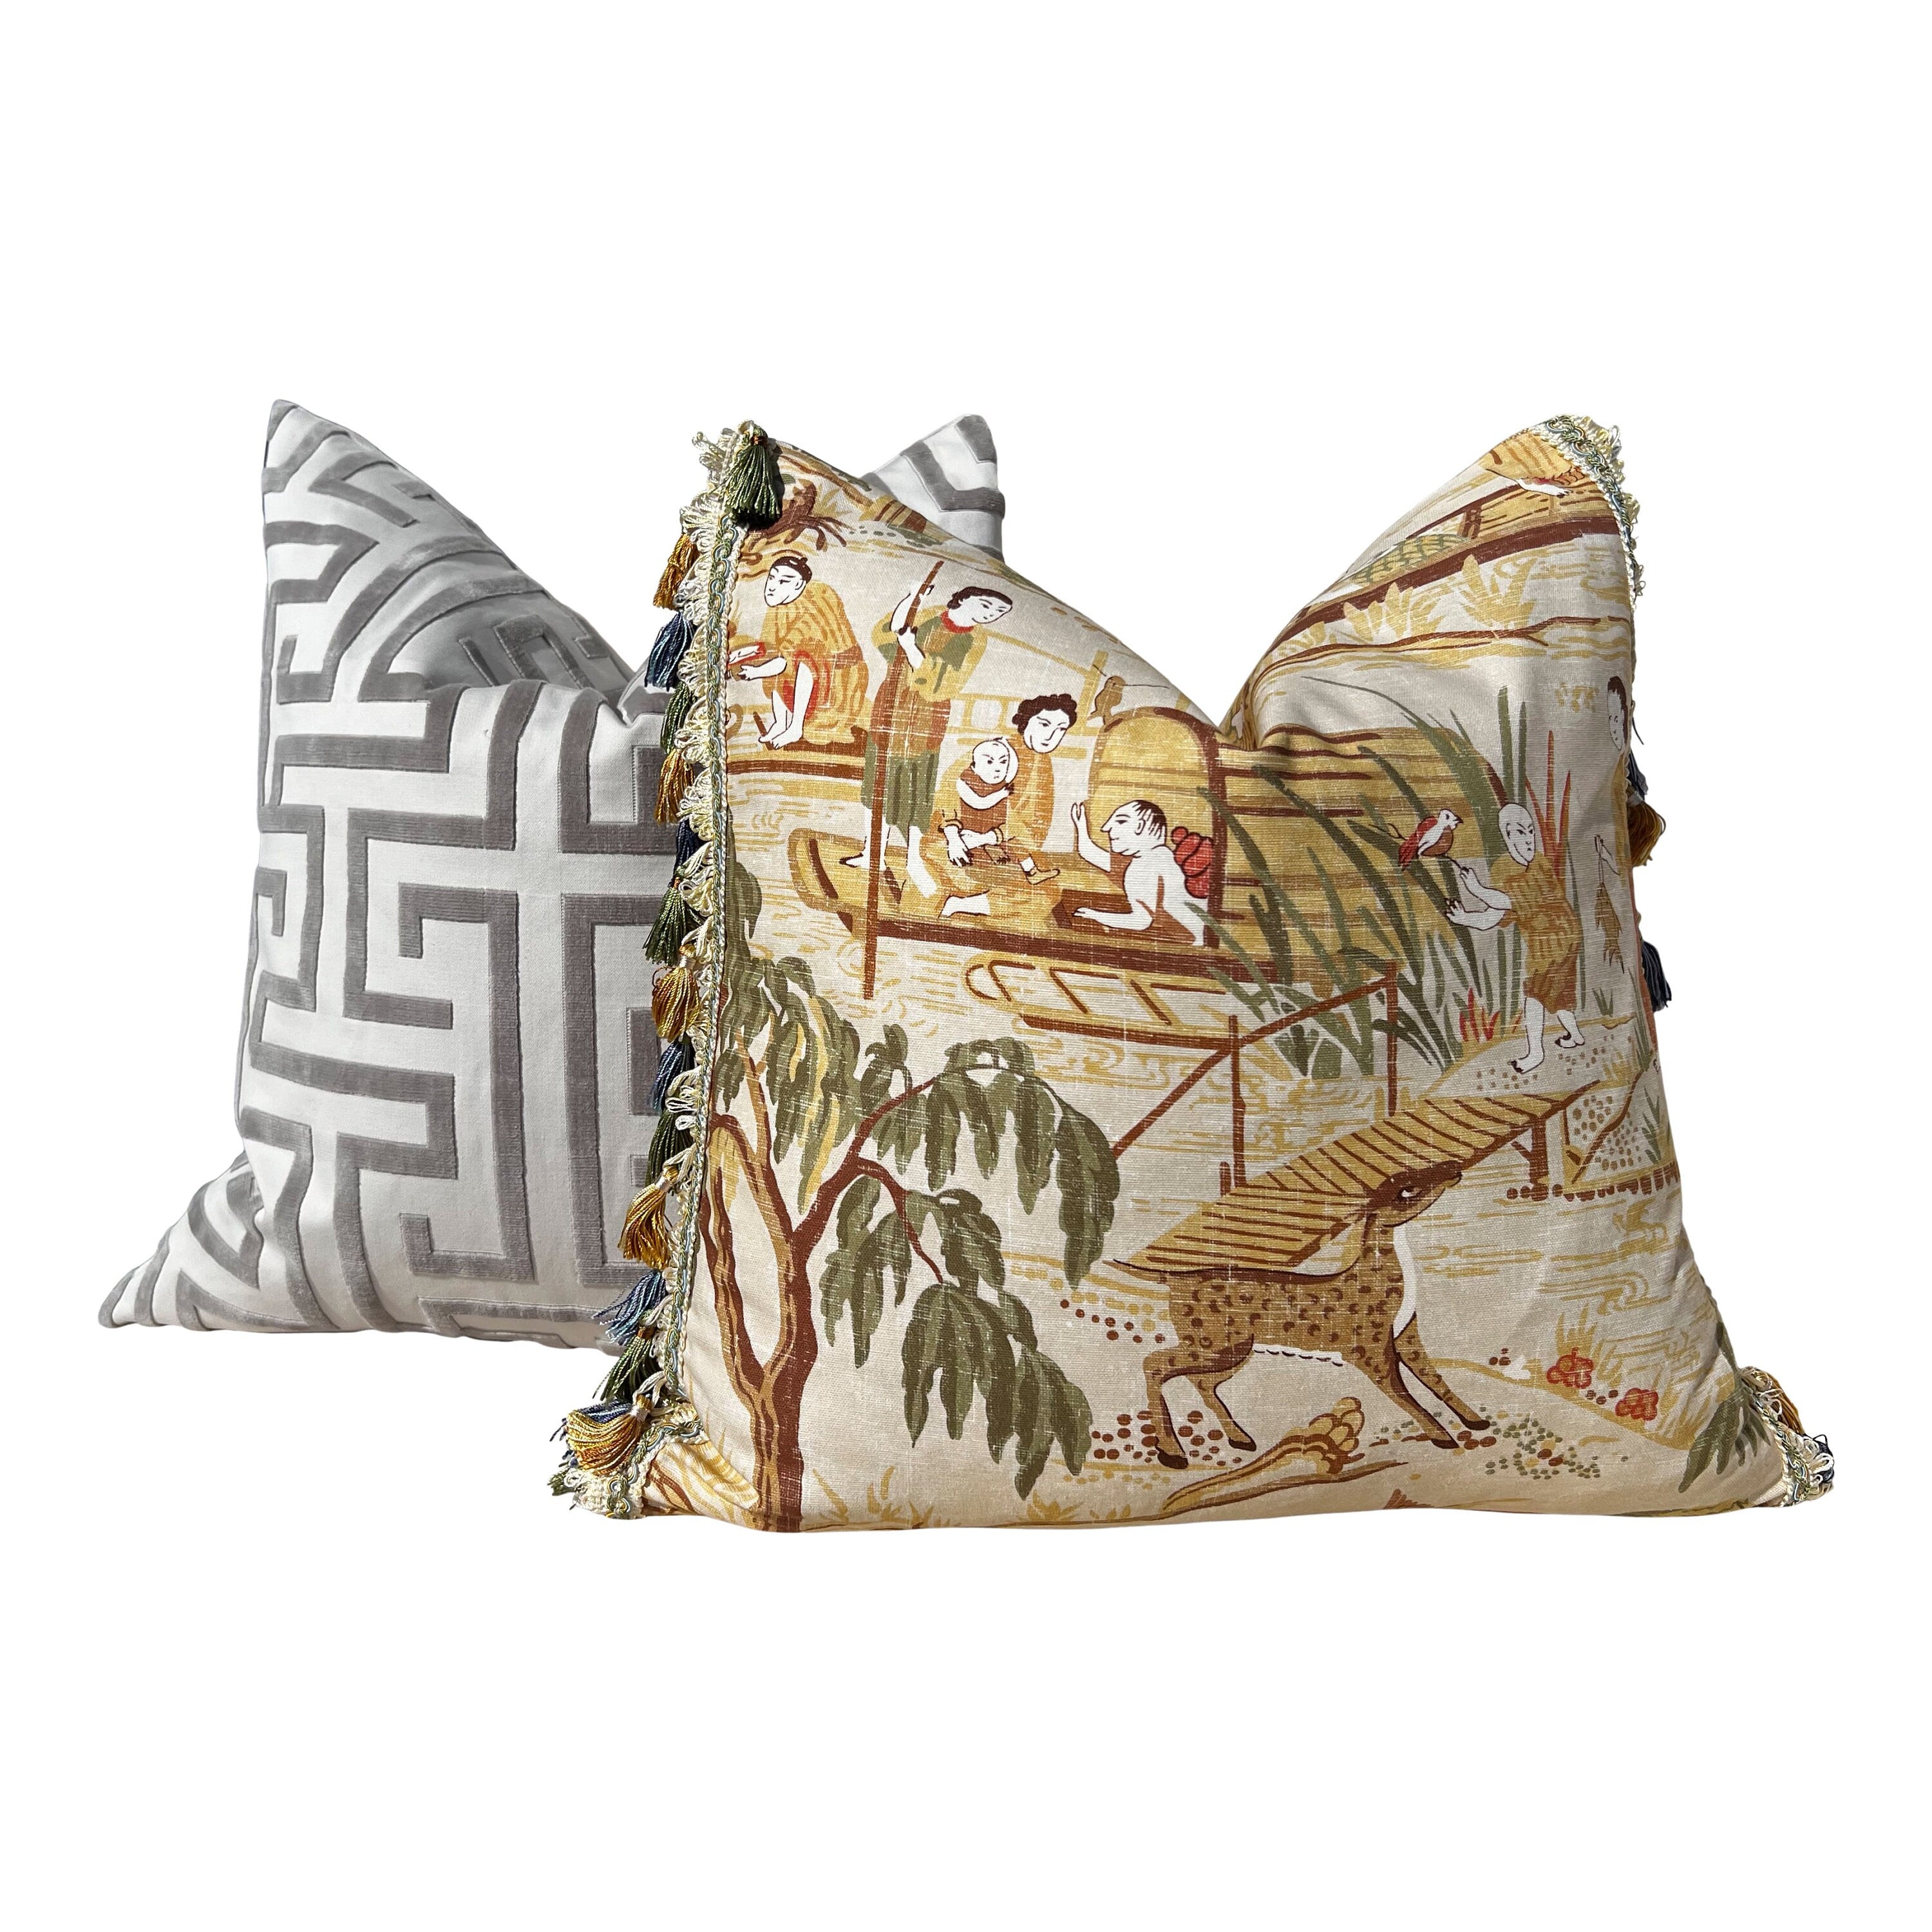 Thibaut Fishing Village Pillow in Beige with Tassel Trim, Chinoiserie Pillow Cover, Beige Green Decorative Pillows, Euro Sham Cover